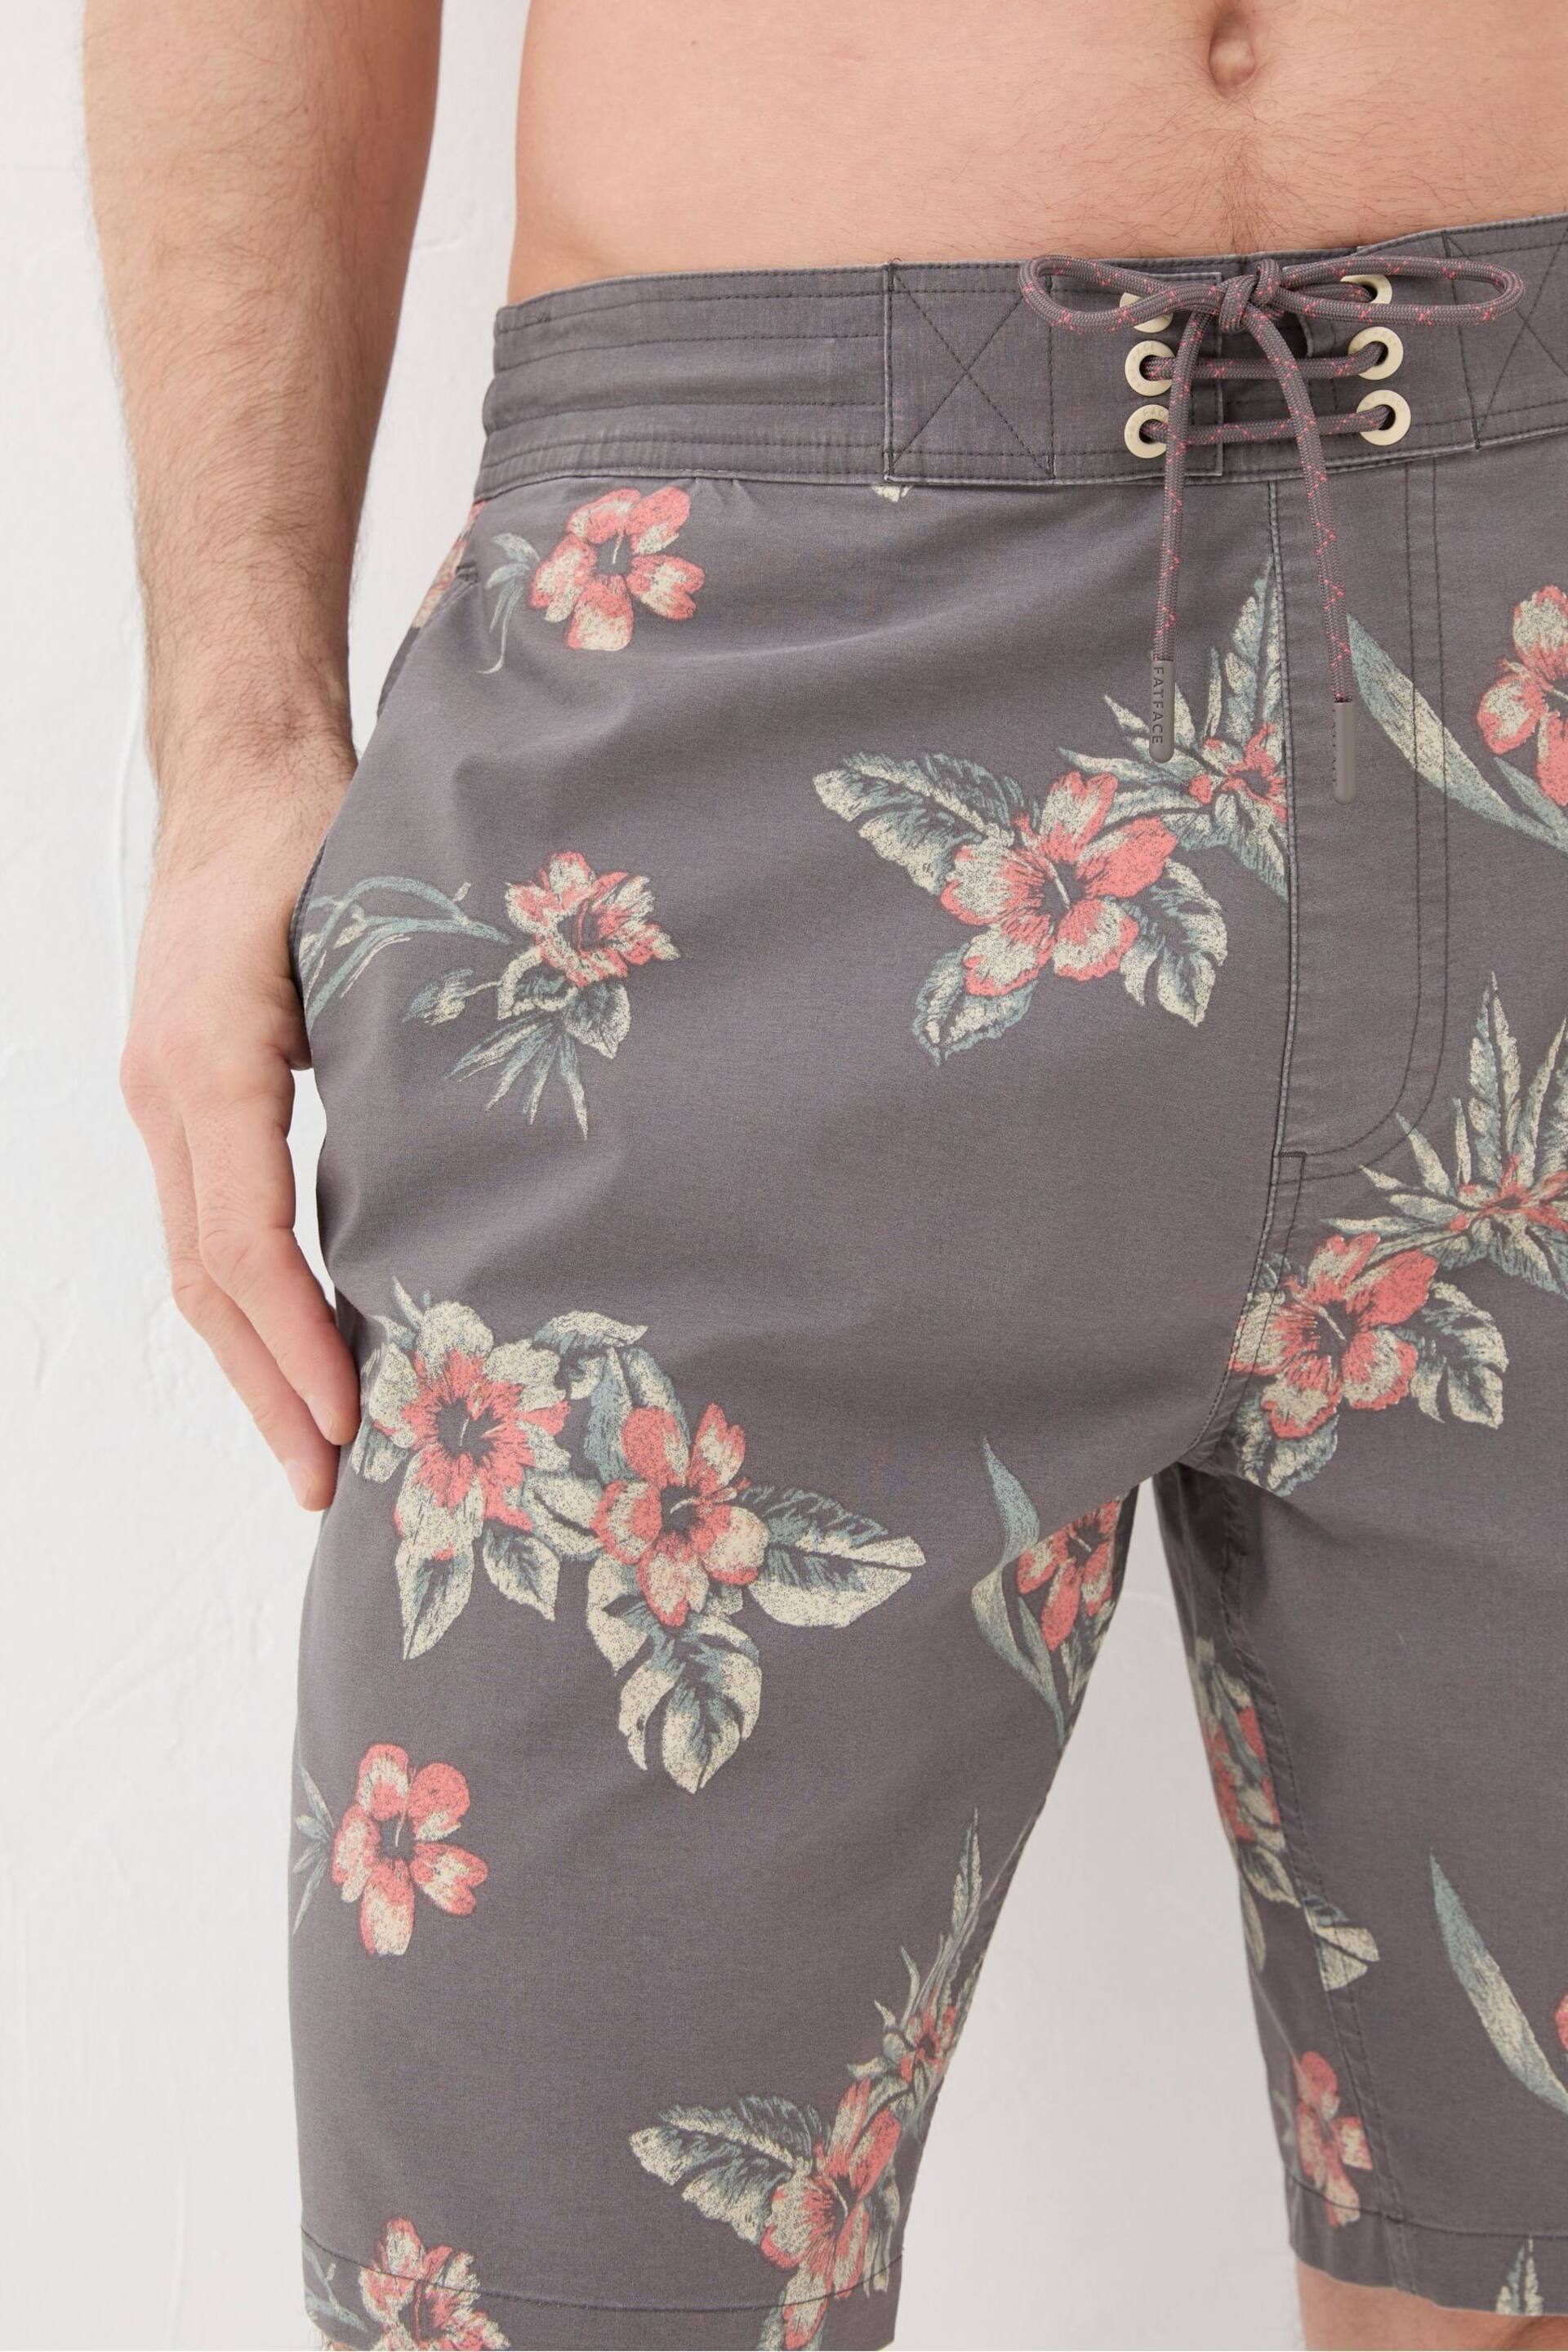 FatFace Brown Camber Hibiscus Swim Shorts - Image 3 of 4